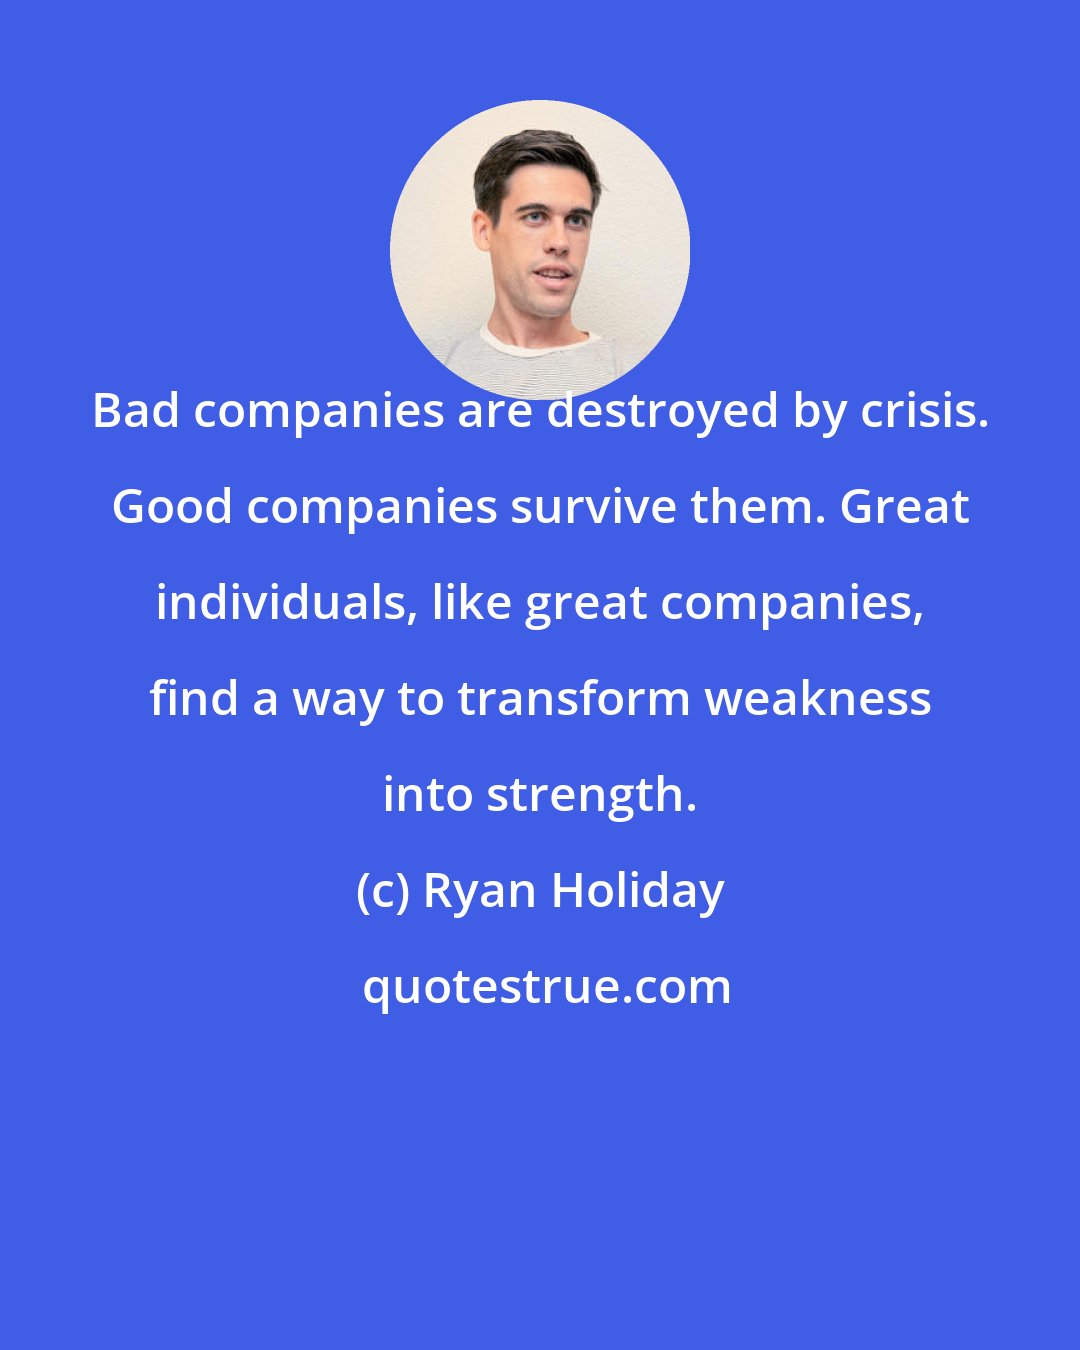 Ryan Holiday: Bad companies are destroyed by crisis. Good companies survive them. Great individuals, like great companies, find a way to transform weakness into strength.